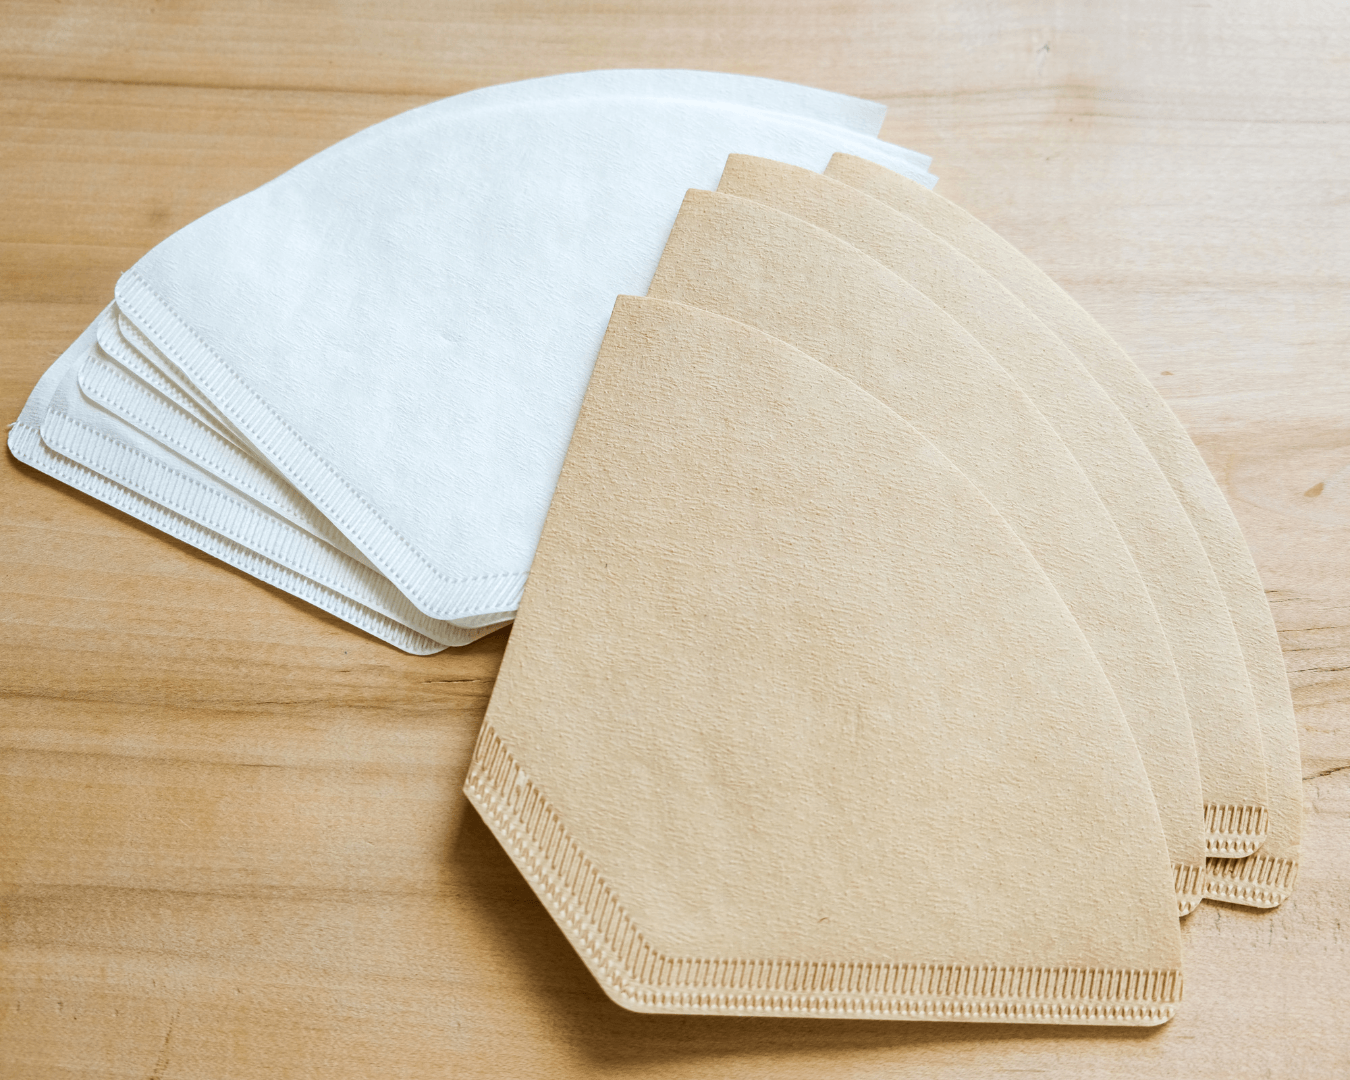 A close comparison of bleached, cone-shaped paper coffee filters versus unbleached coffee filters